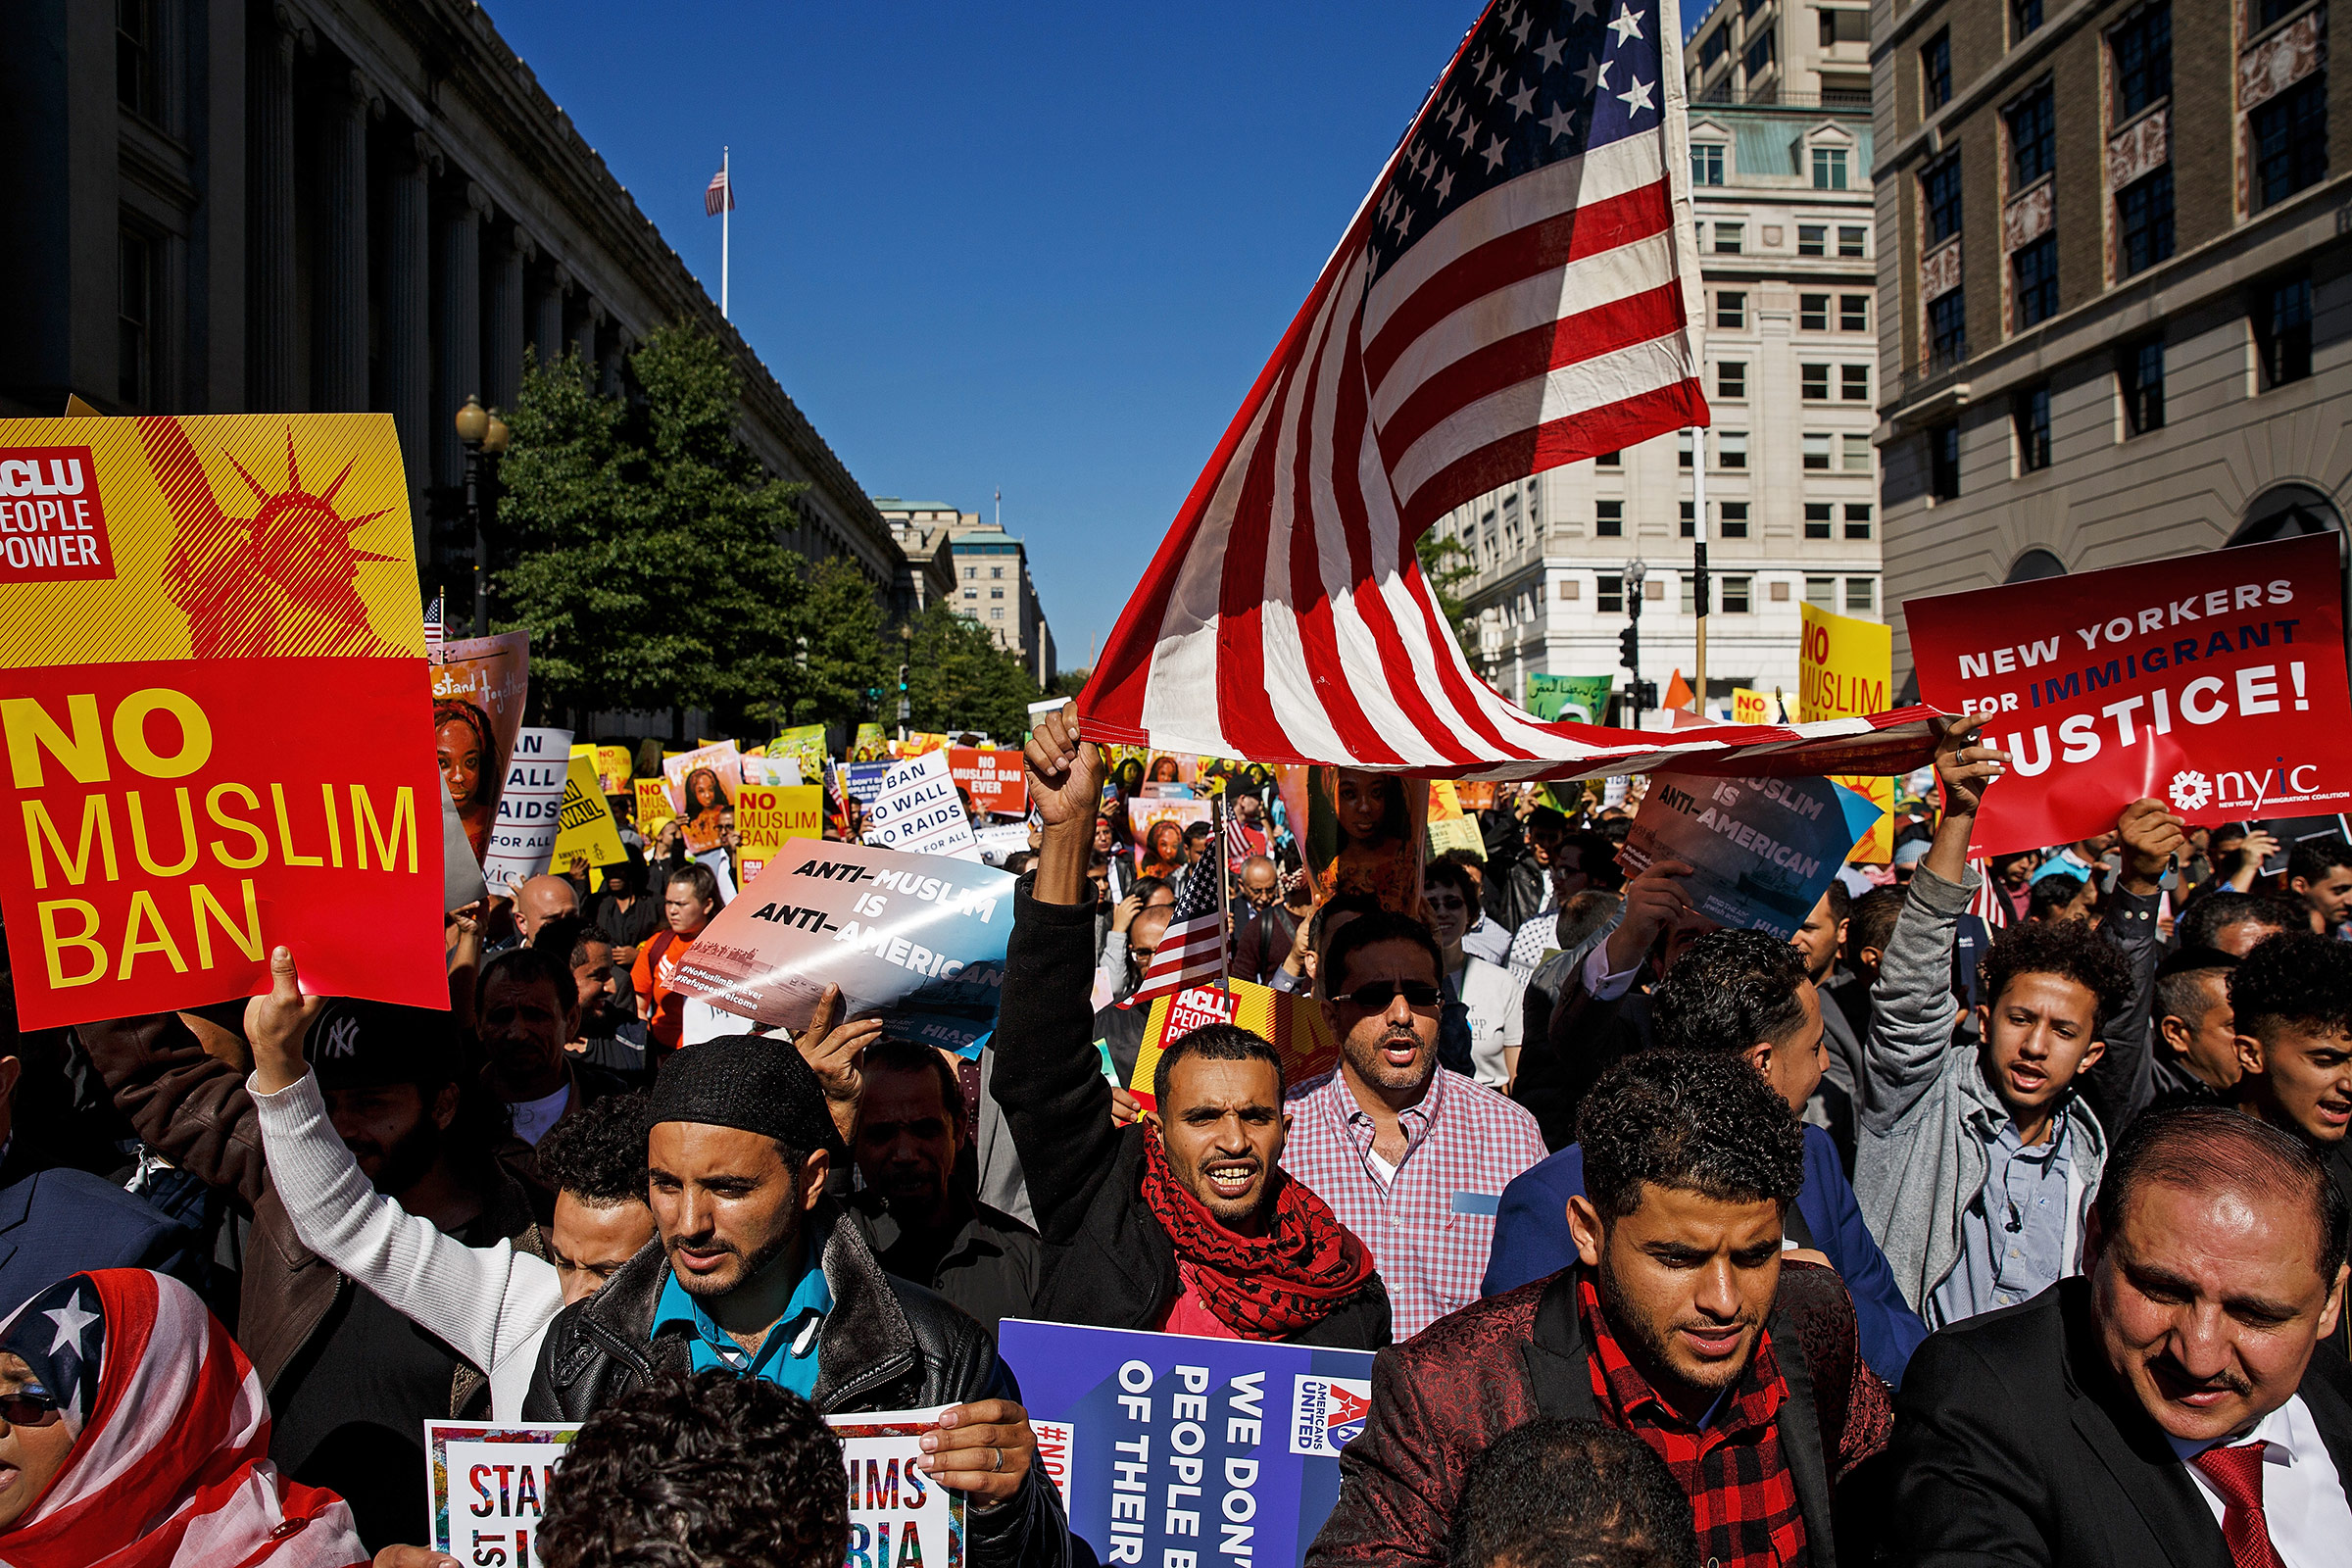 Protesters in Washington, D.C., march against Trump’s attempts to restrict travel from predominantly Muslim countries in October 2017 (Drew Angerer—Getty Images)